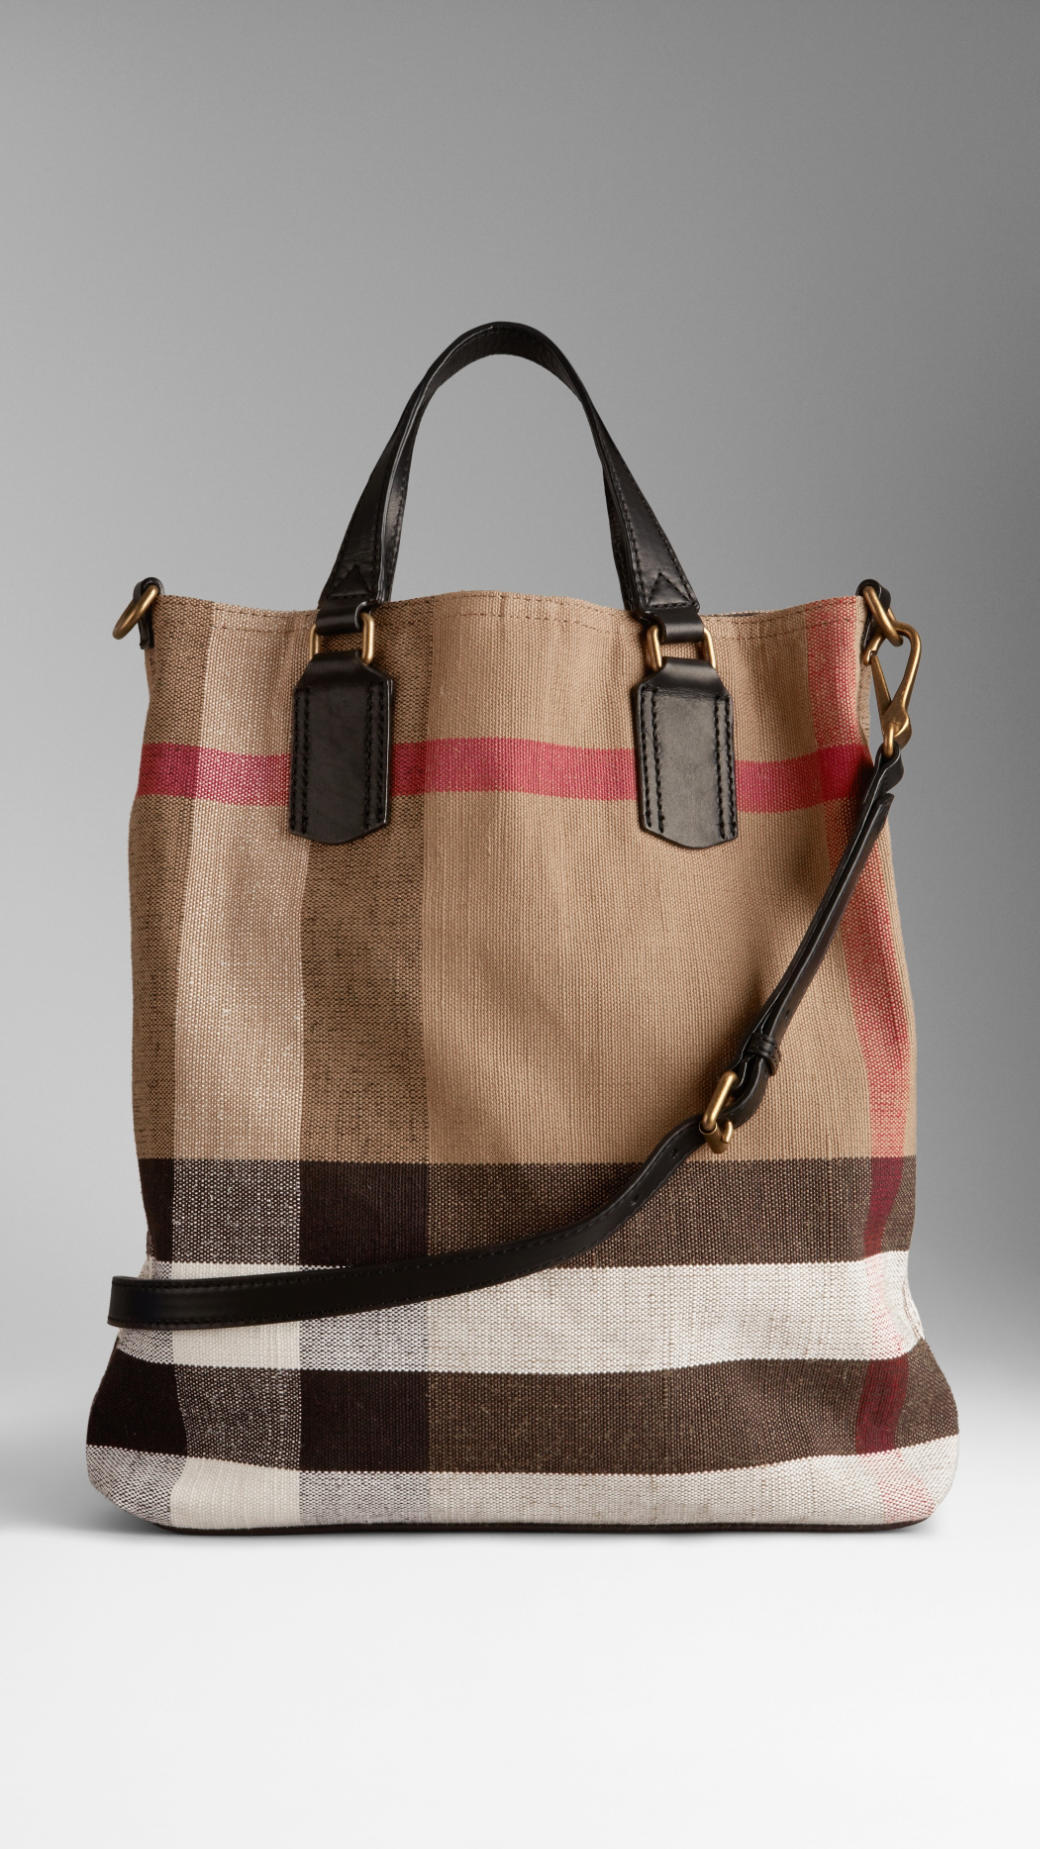 Lyst - Burberry Medium Canvas Check Tote Bag in Brown